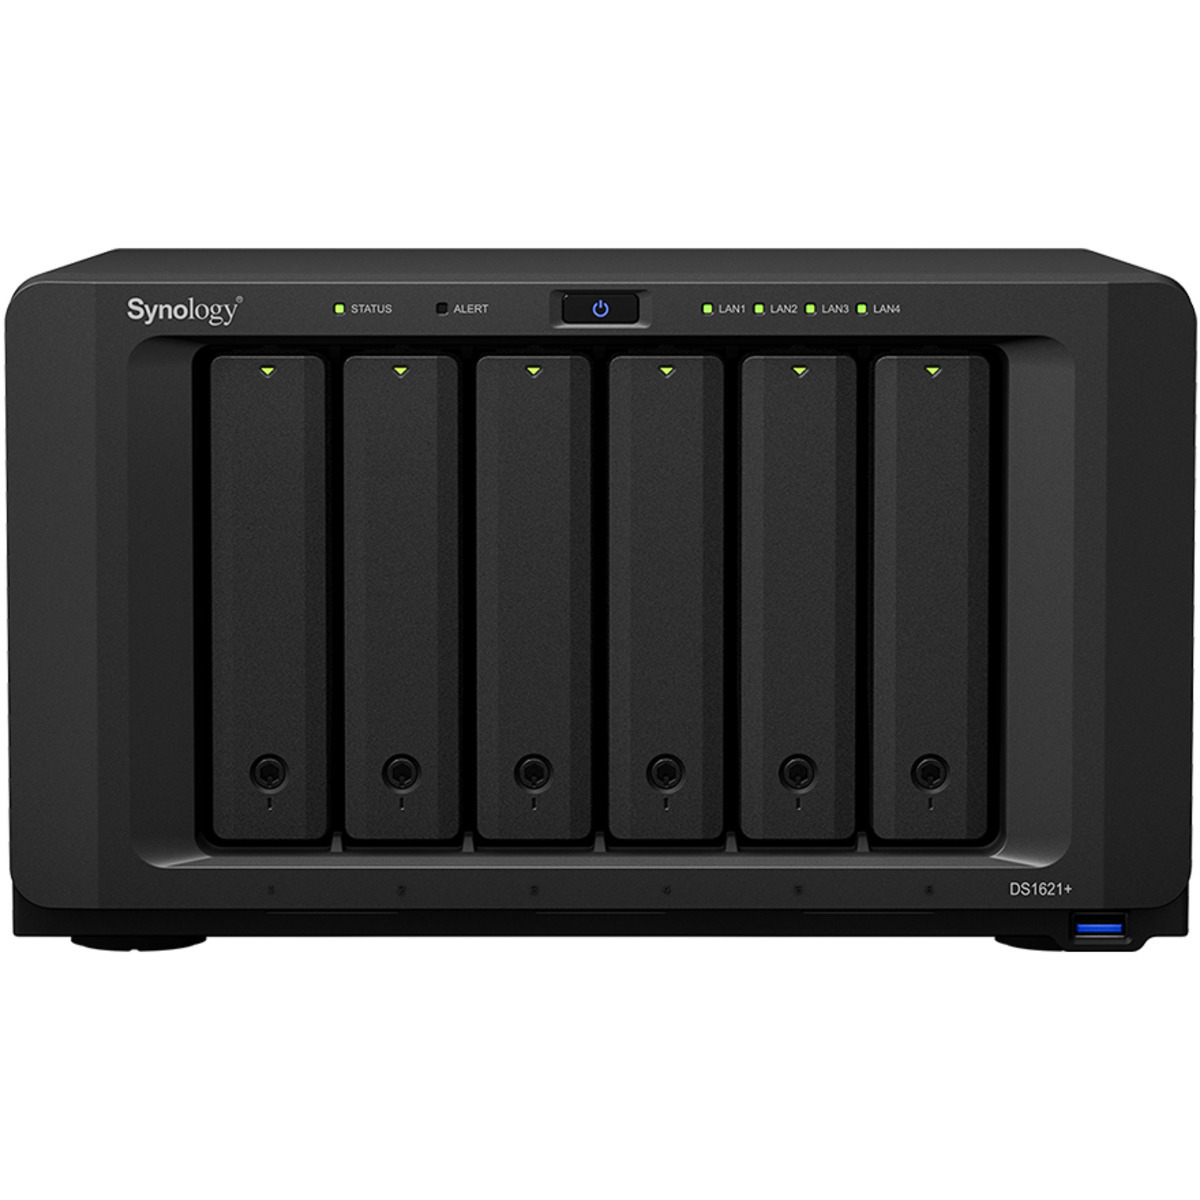 Synology DiskStation DS1621+ 50tb 6-Bay Desktop Multimedia / Power User / Business NAS - Network Attached Storage Device 5x10tb Western Digital Red Pro WD102KFBX 3.5 7200rpm SATA 6Gb/s HDD NAS Class Drives Installed - Burn-In Tested - FREE RAM UPGRADE DiskStation DS1621+